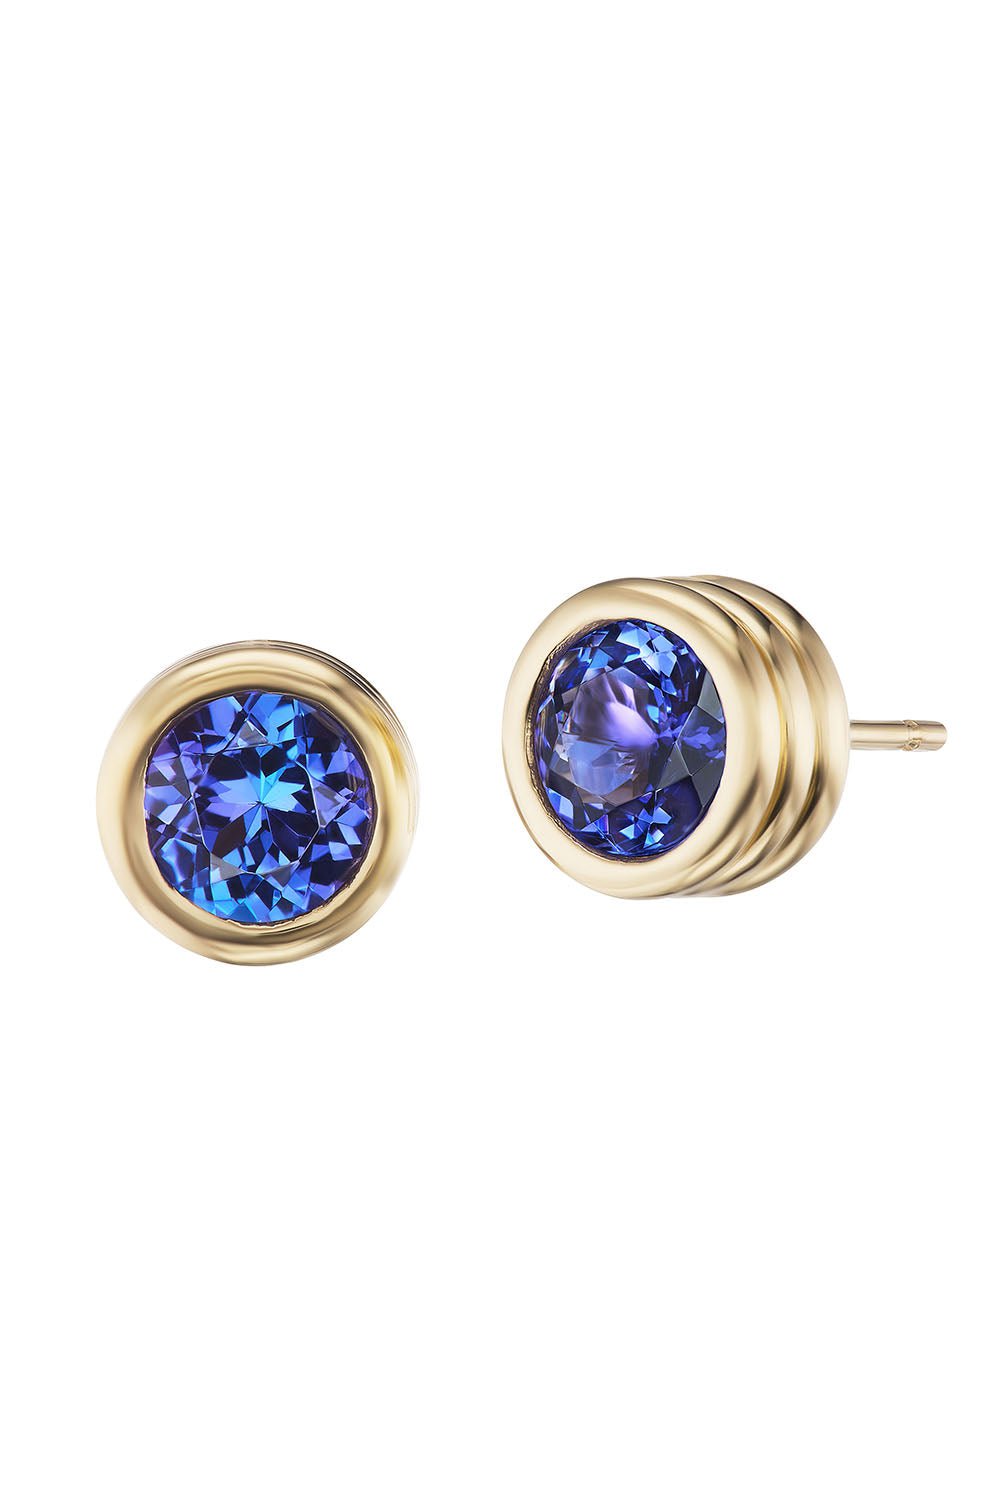 BECK JEWELS-Grotto Tanzanite Stud Earrings-YELLOW GOLD